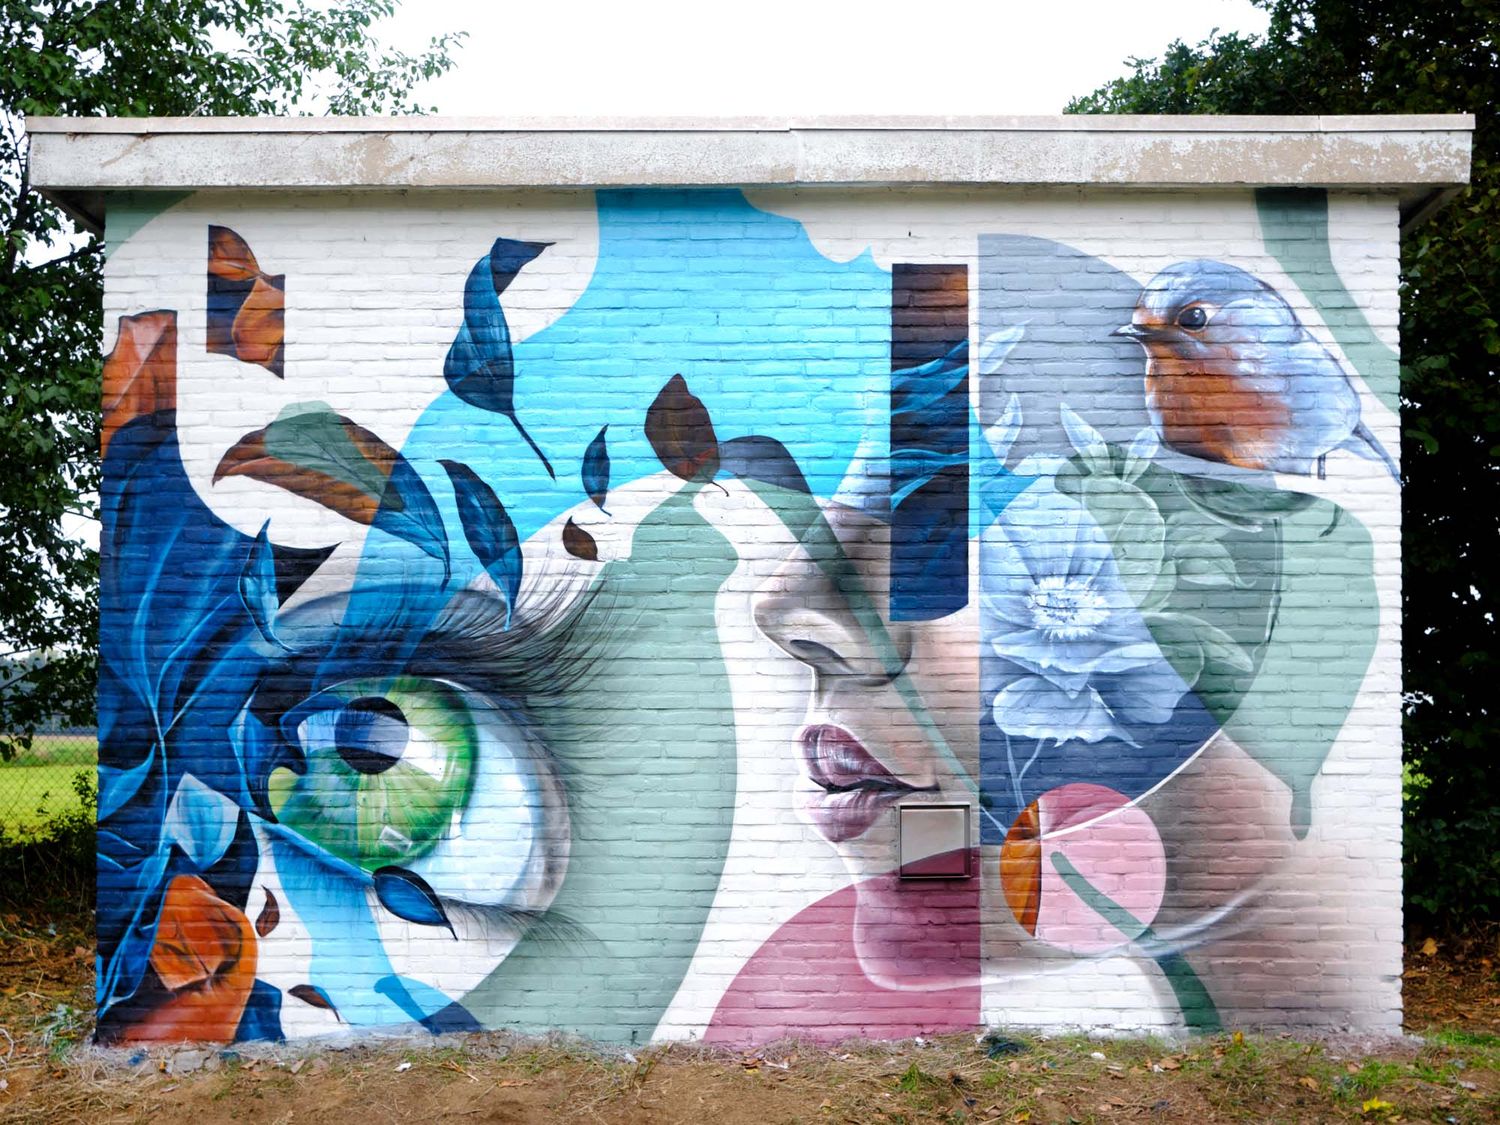 On top of eyes and hands, Gomad has also includes elements from the nature like flowers as a reference to the climate change and pollution, here a small mural in the artist’s hometown of Sittard.